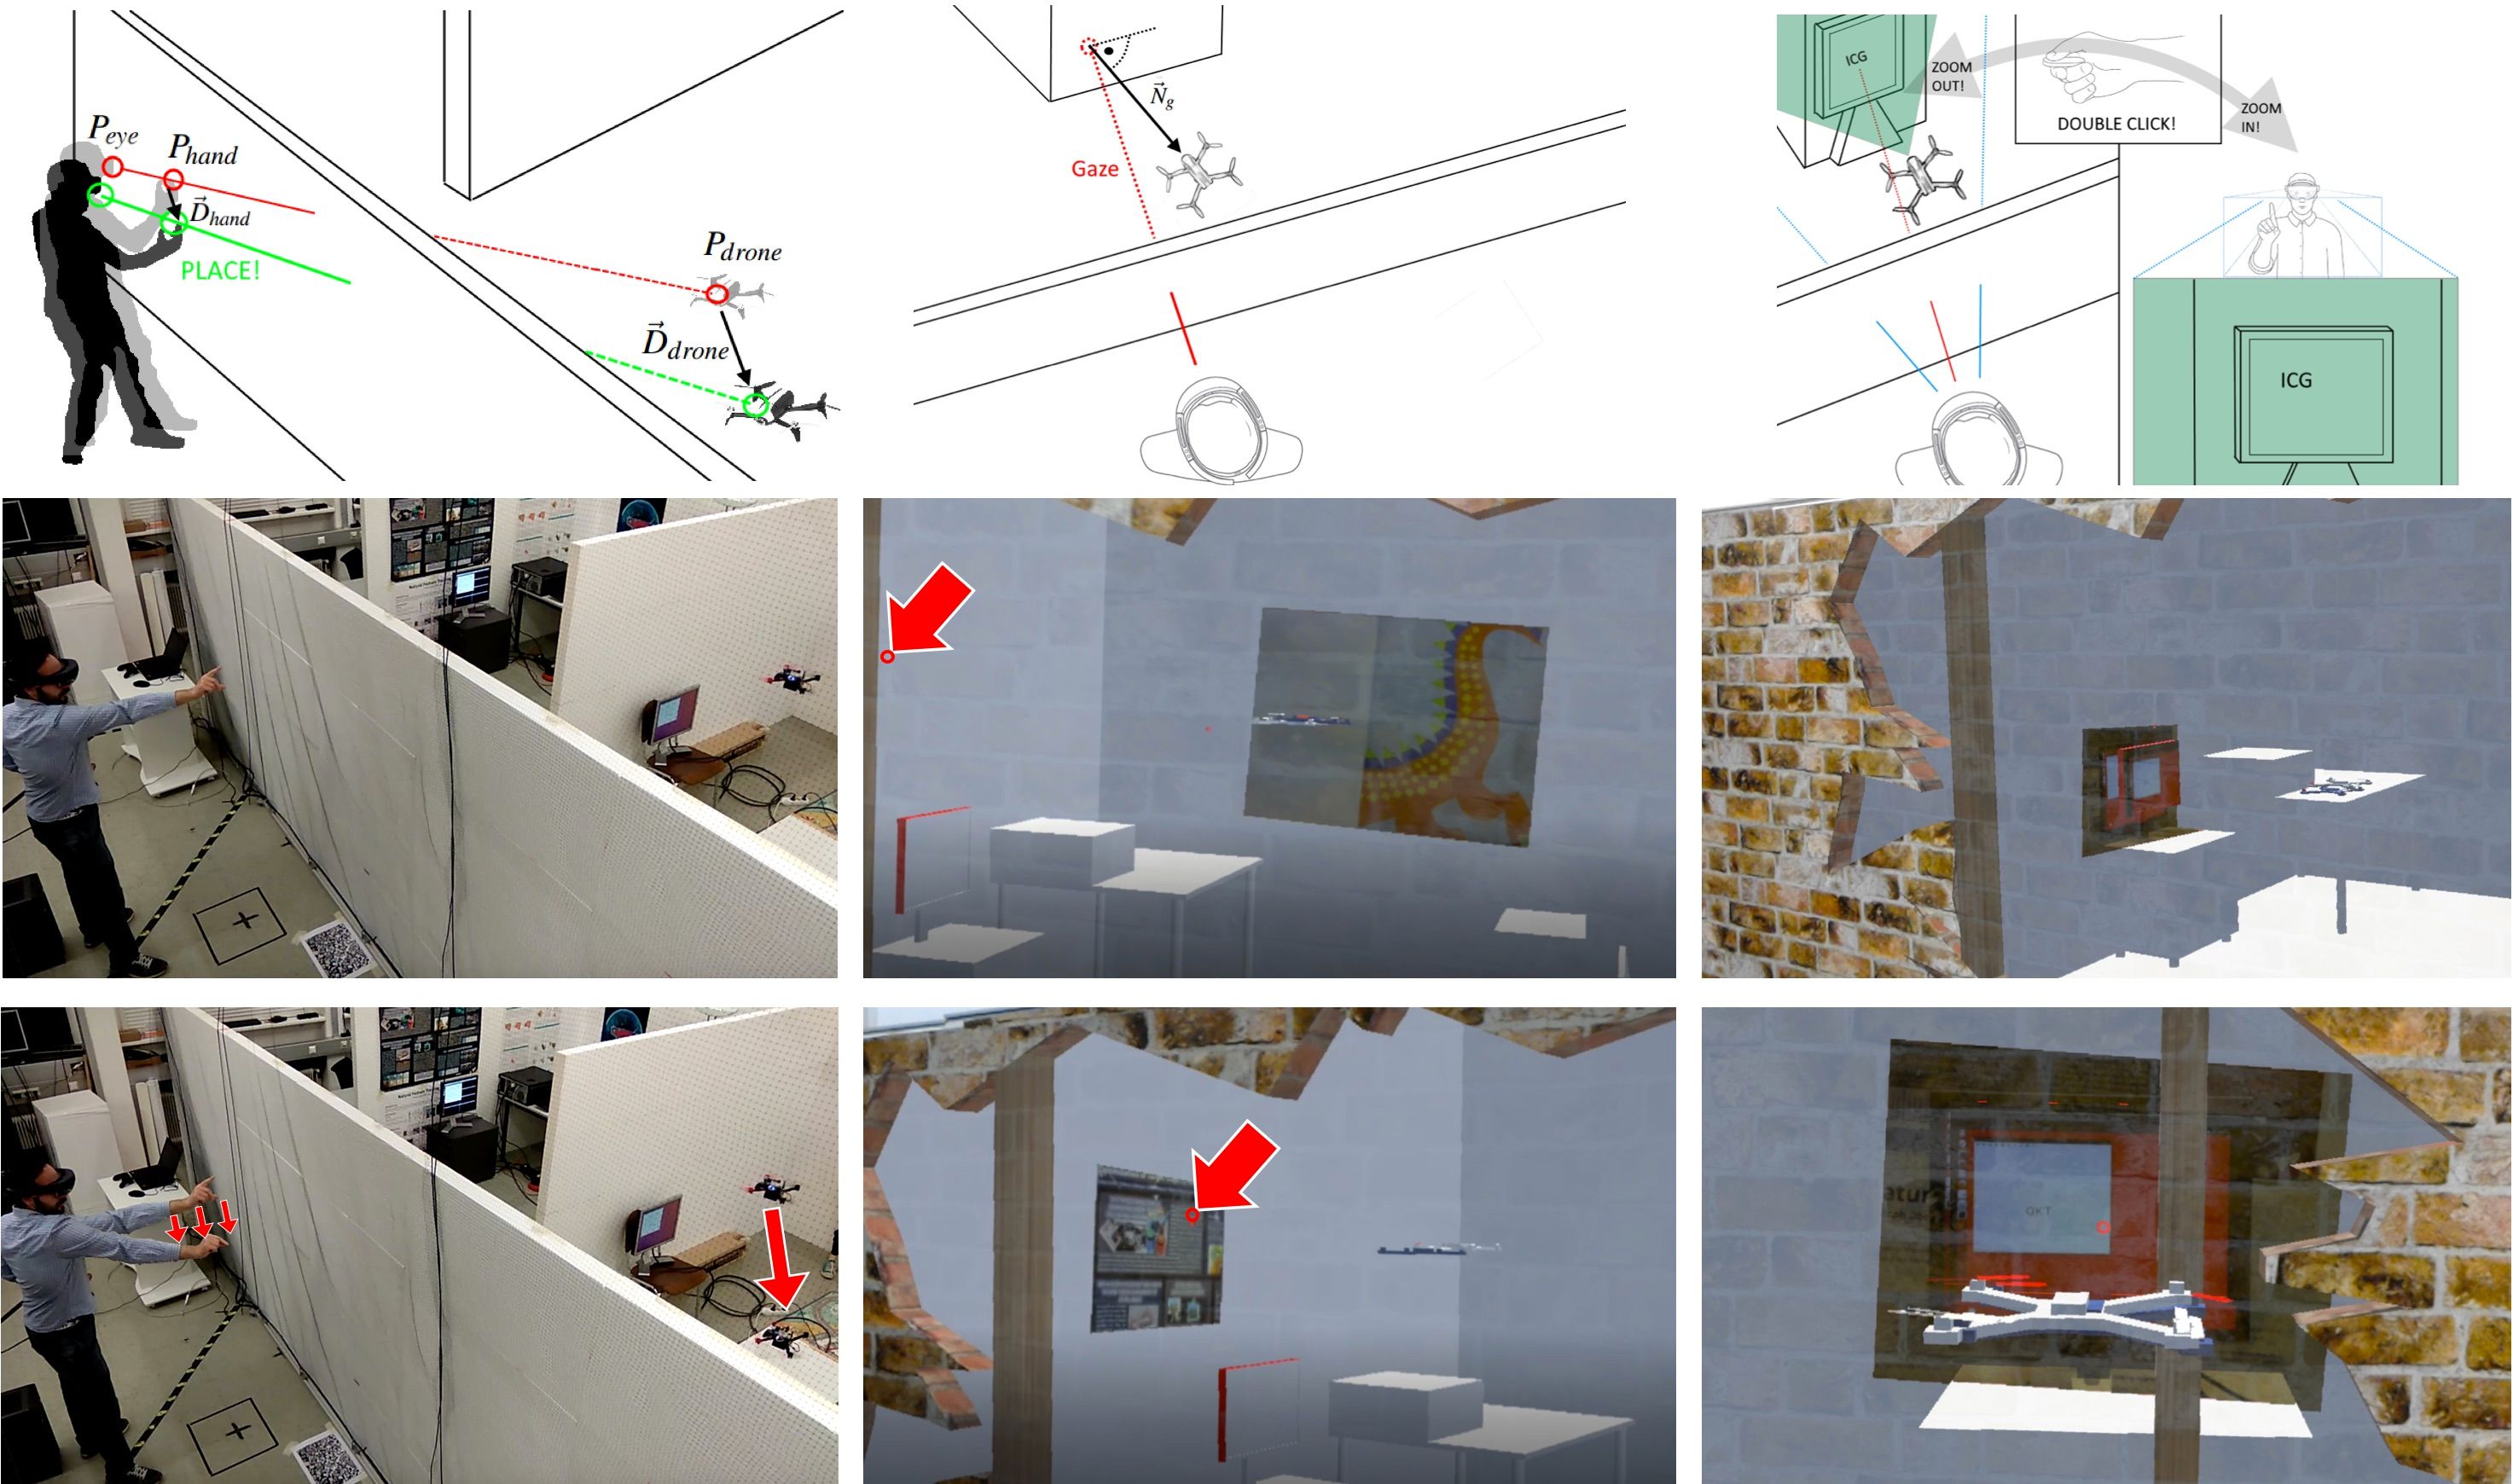 Drone lets you see through walls with VR